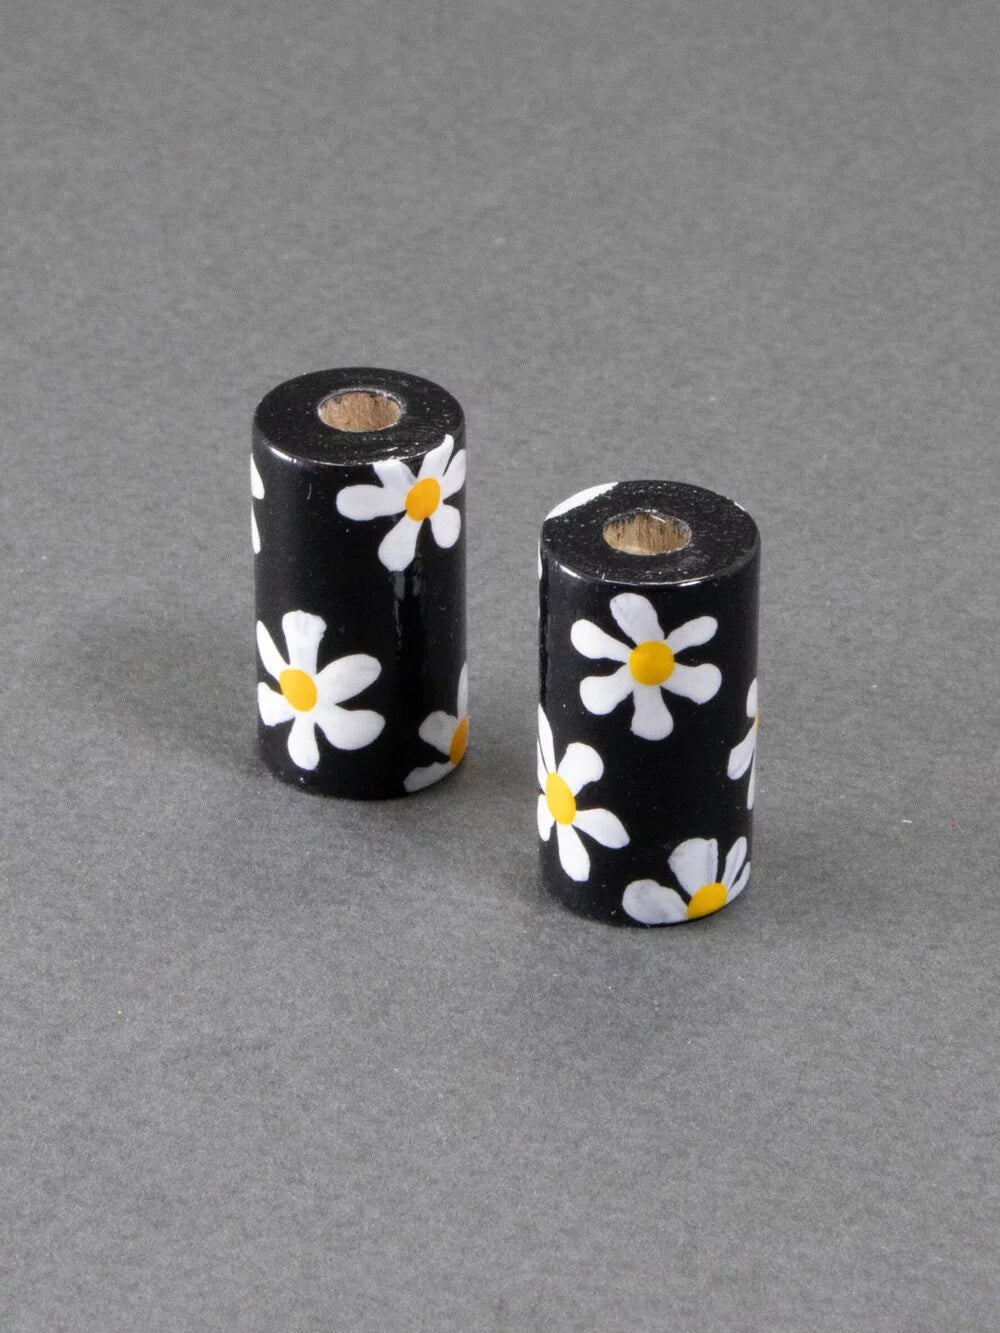 Black Daisy Wooden Bead in Cylinder Shape